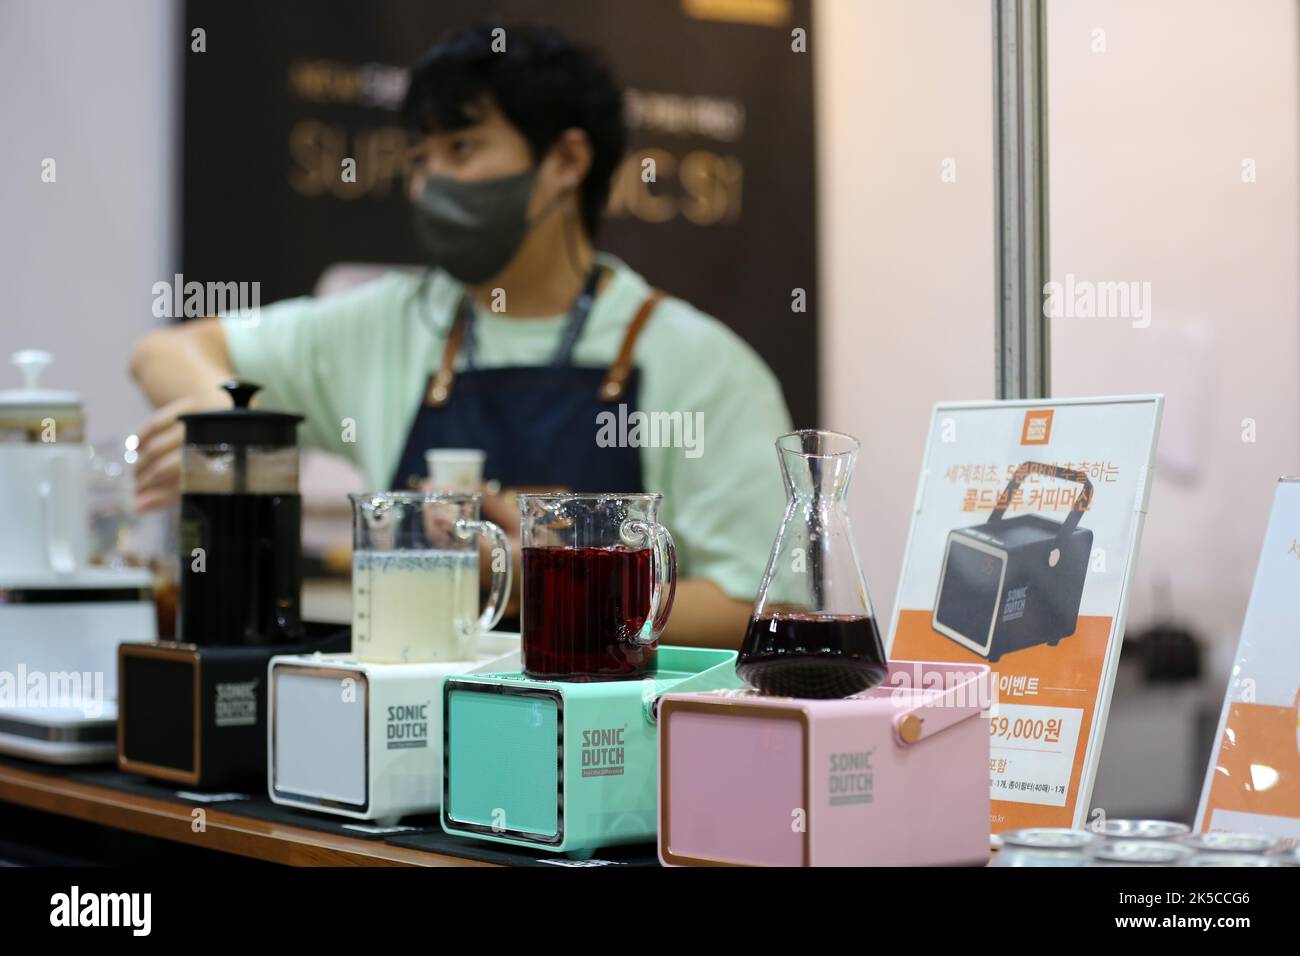 Goyang. 7th Oct, 2022. Photo taken on Oct. 7, 2022 shows coffee machines displayed at the Cafe and Bakery Fair in Goyang, South Korea. The fair will last till Oct. 9. Credit: Wang Yiliang/Xinhua/Alamy Live News Stock Photo